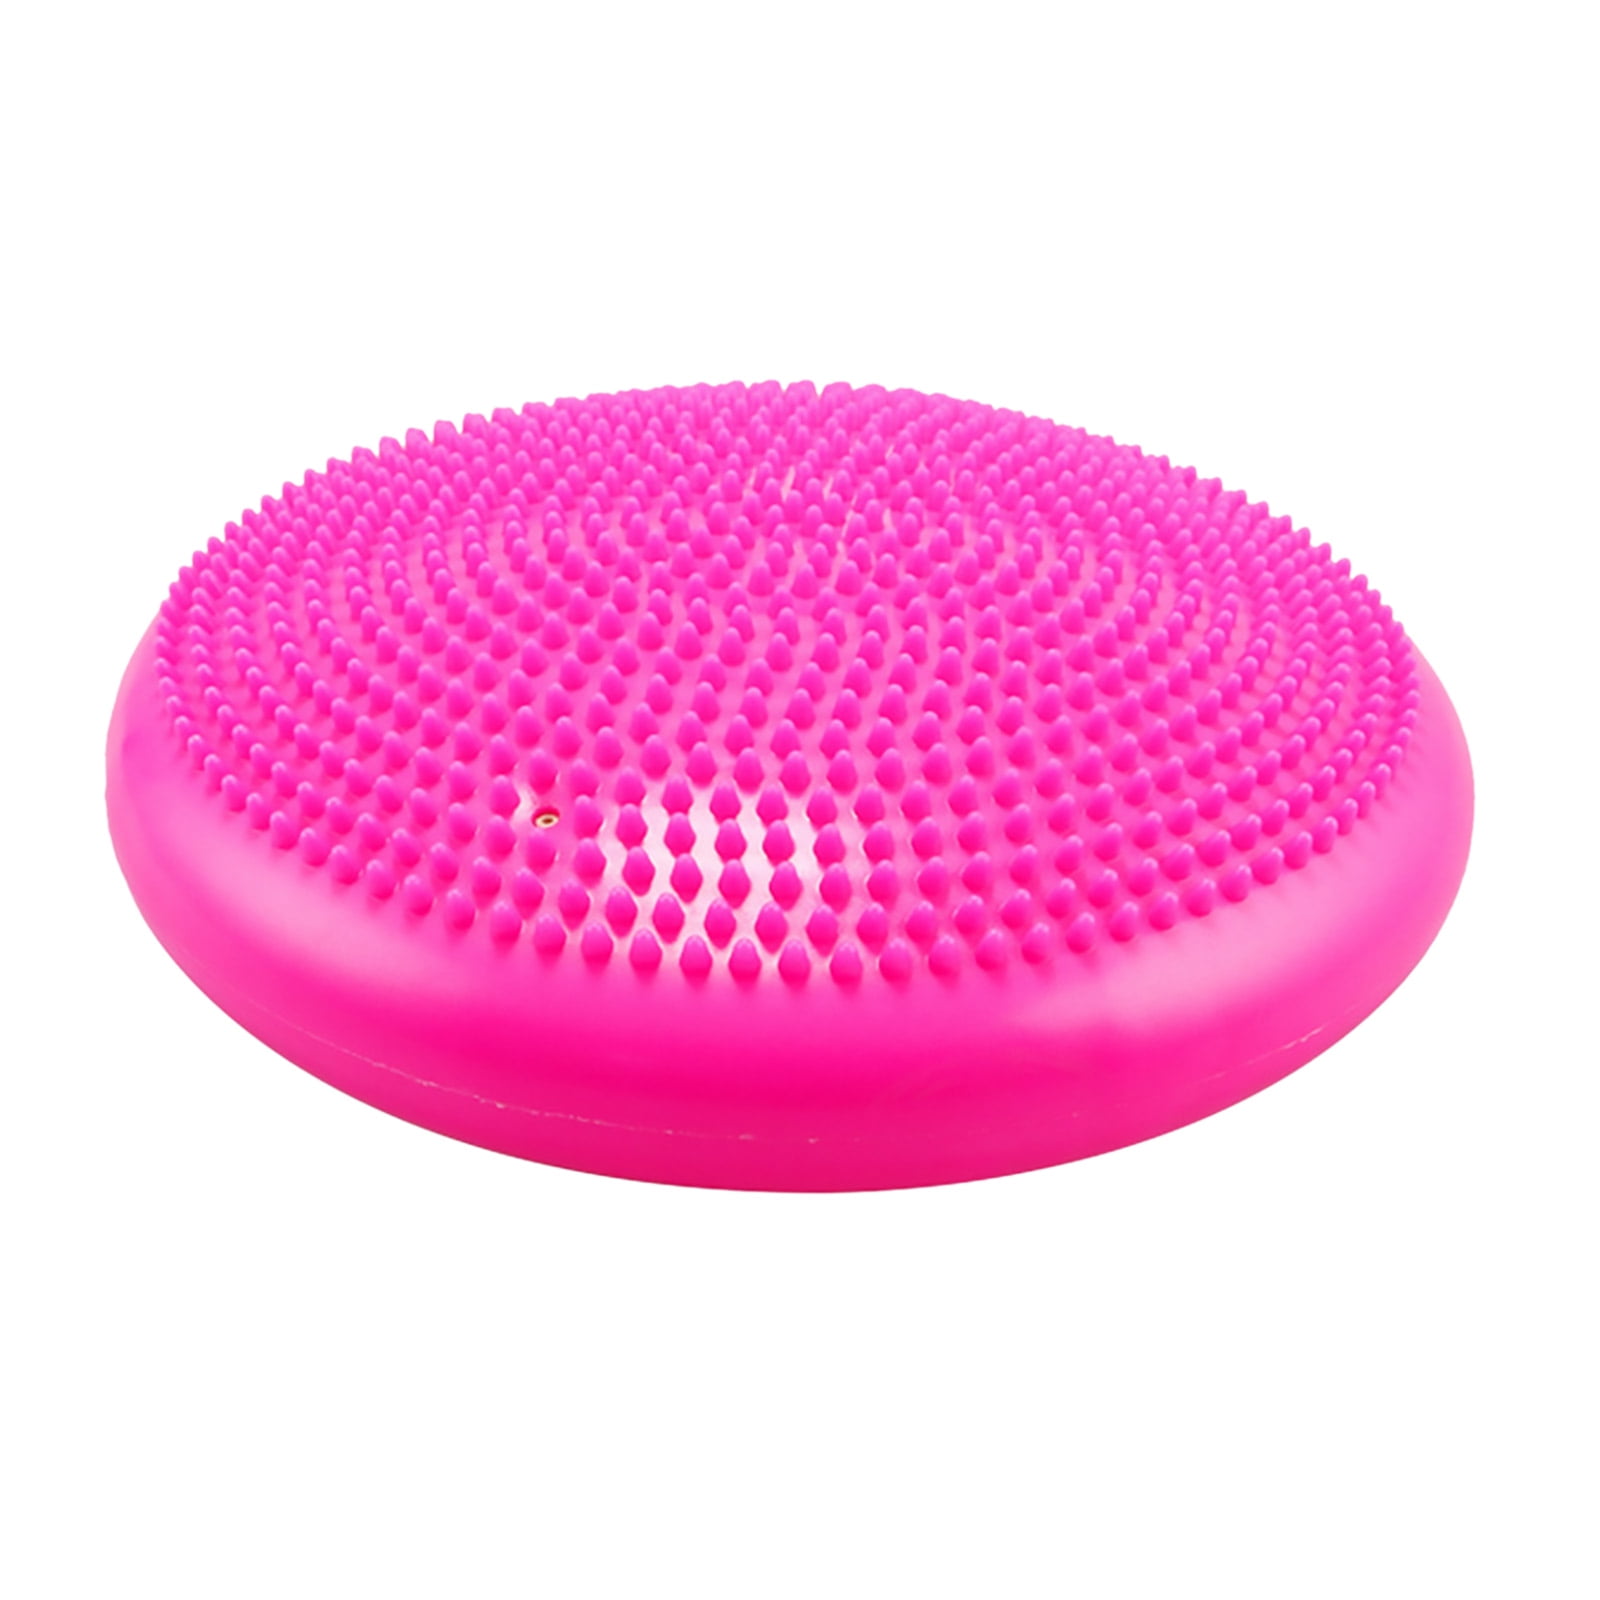 Fitness Balance Pad Stability Cushion for Coordination Core Strength Training 